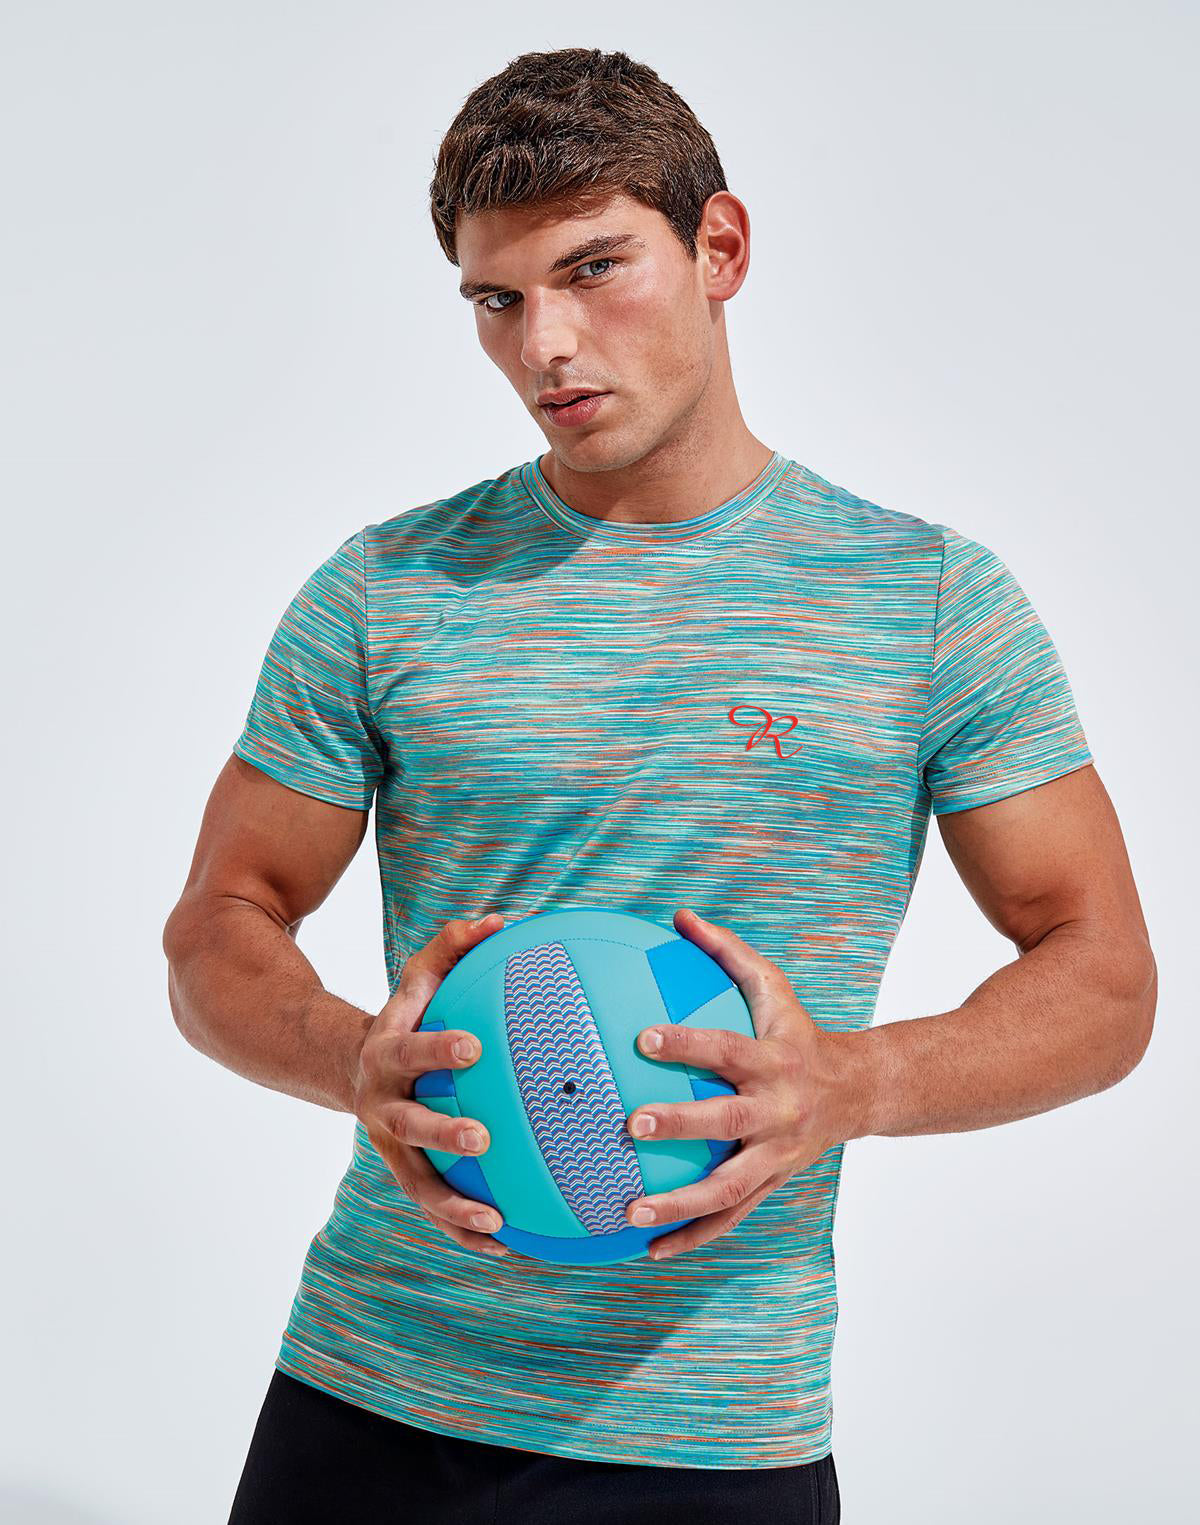 Explore Rival's men's clothing collections, where style meets performance. From sleek activewear to casual classics, discover versatile designs crafted for the modern man